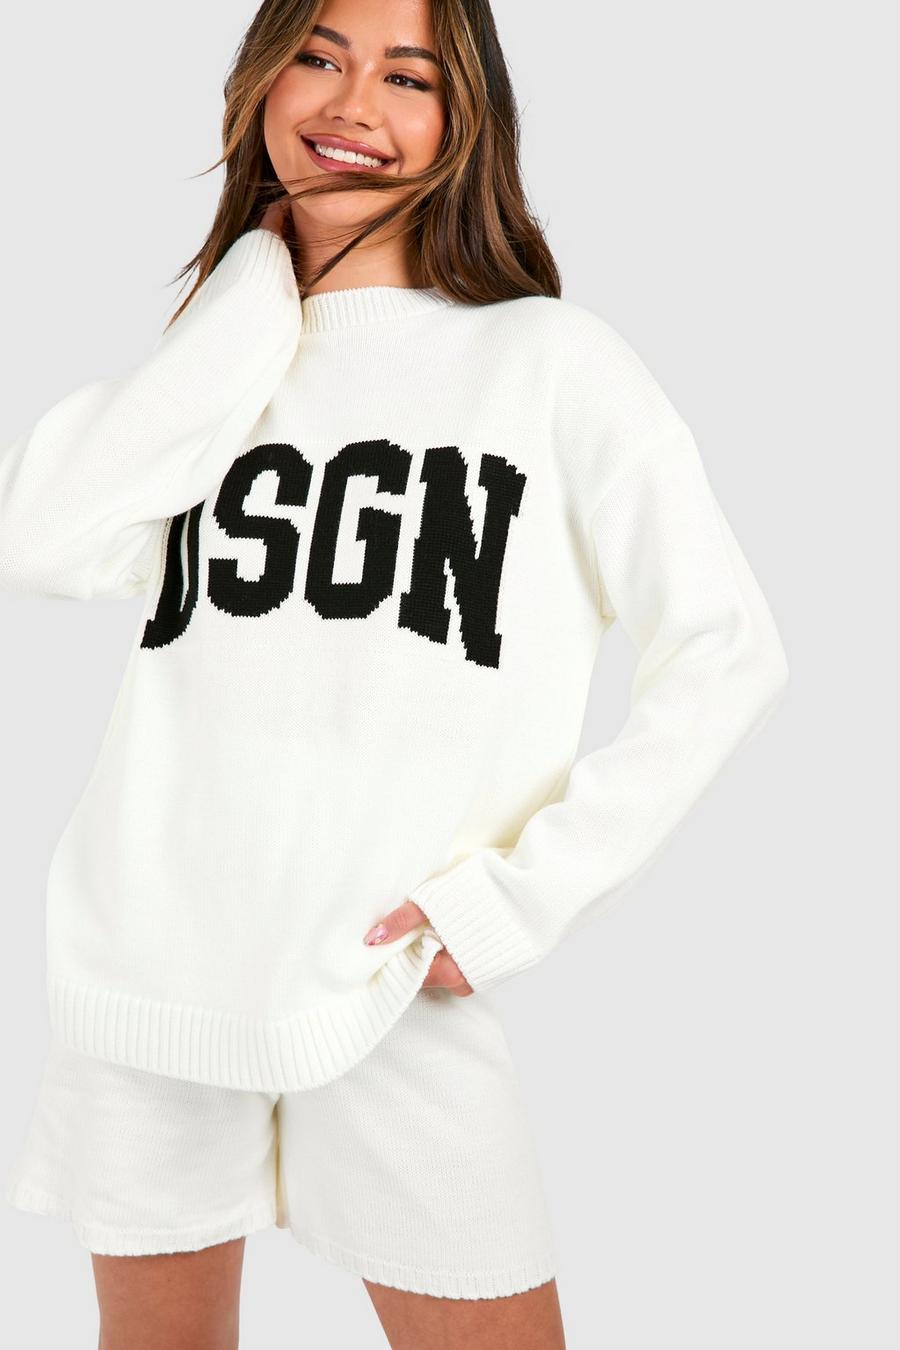 Ecru Dsgn Crew Neck Sweater And Shorts Knitted Set